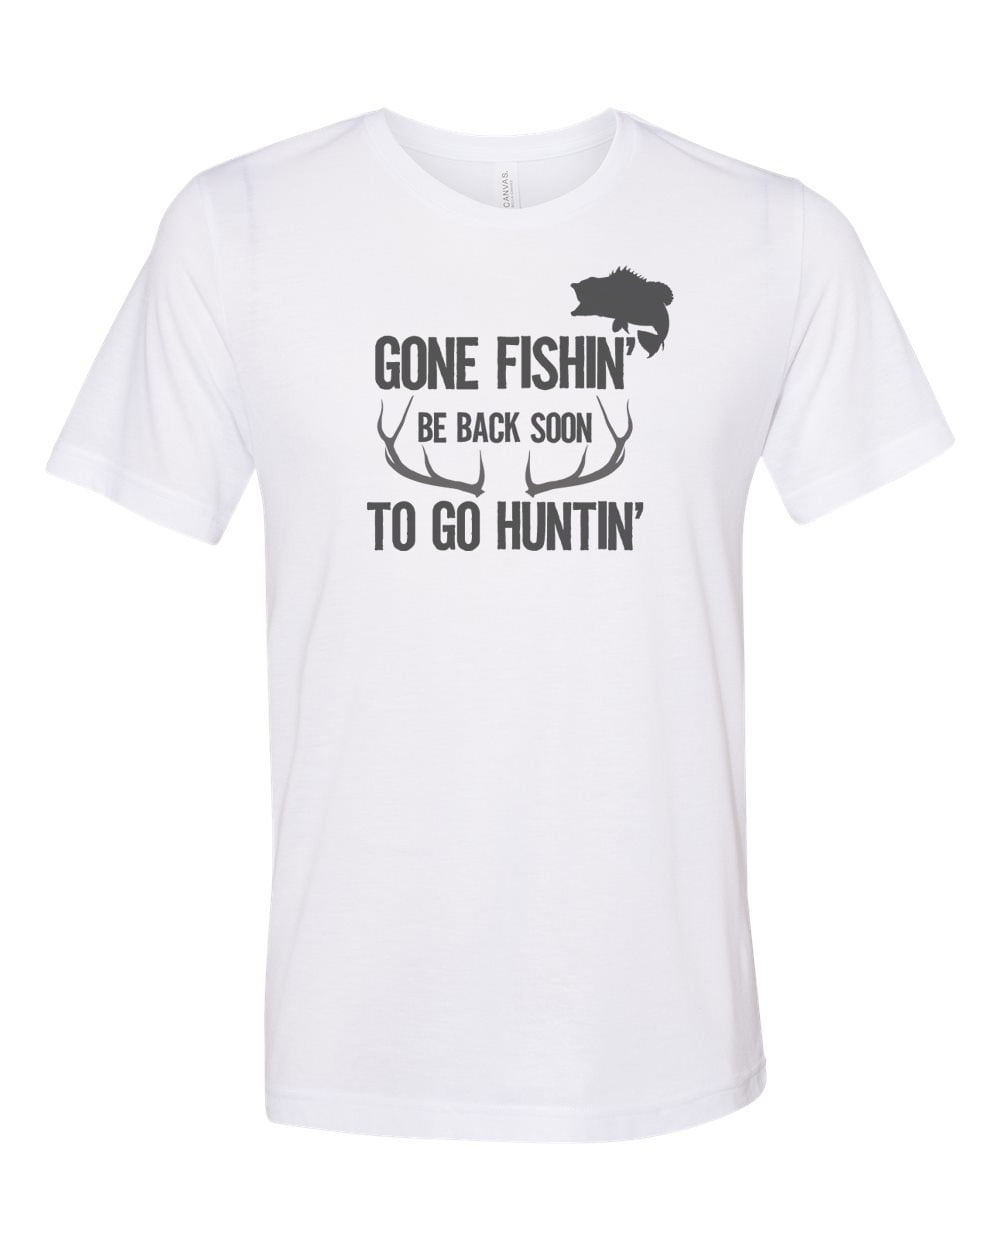 Hunting And Fishing Shirt, Gone Fishin' Be Back To Soon To Go Huntin',  Sublimation Tee, Fishing Shirt, Hunting Shirt, Dad Tee, Father's Day,  White, XL 